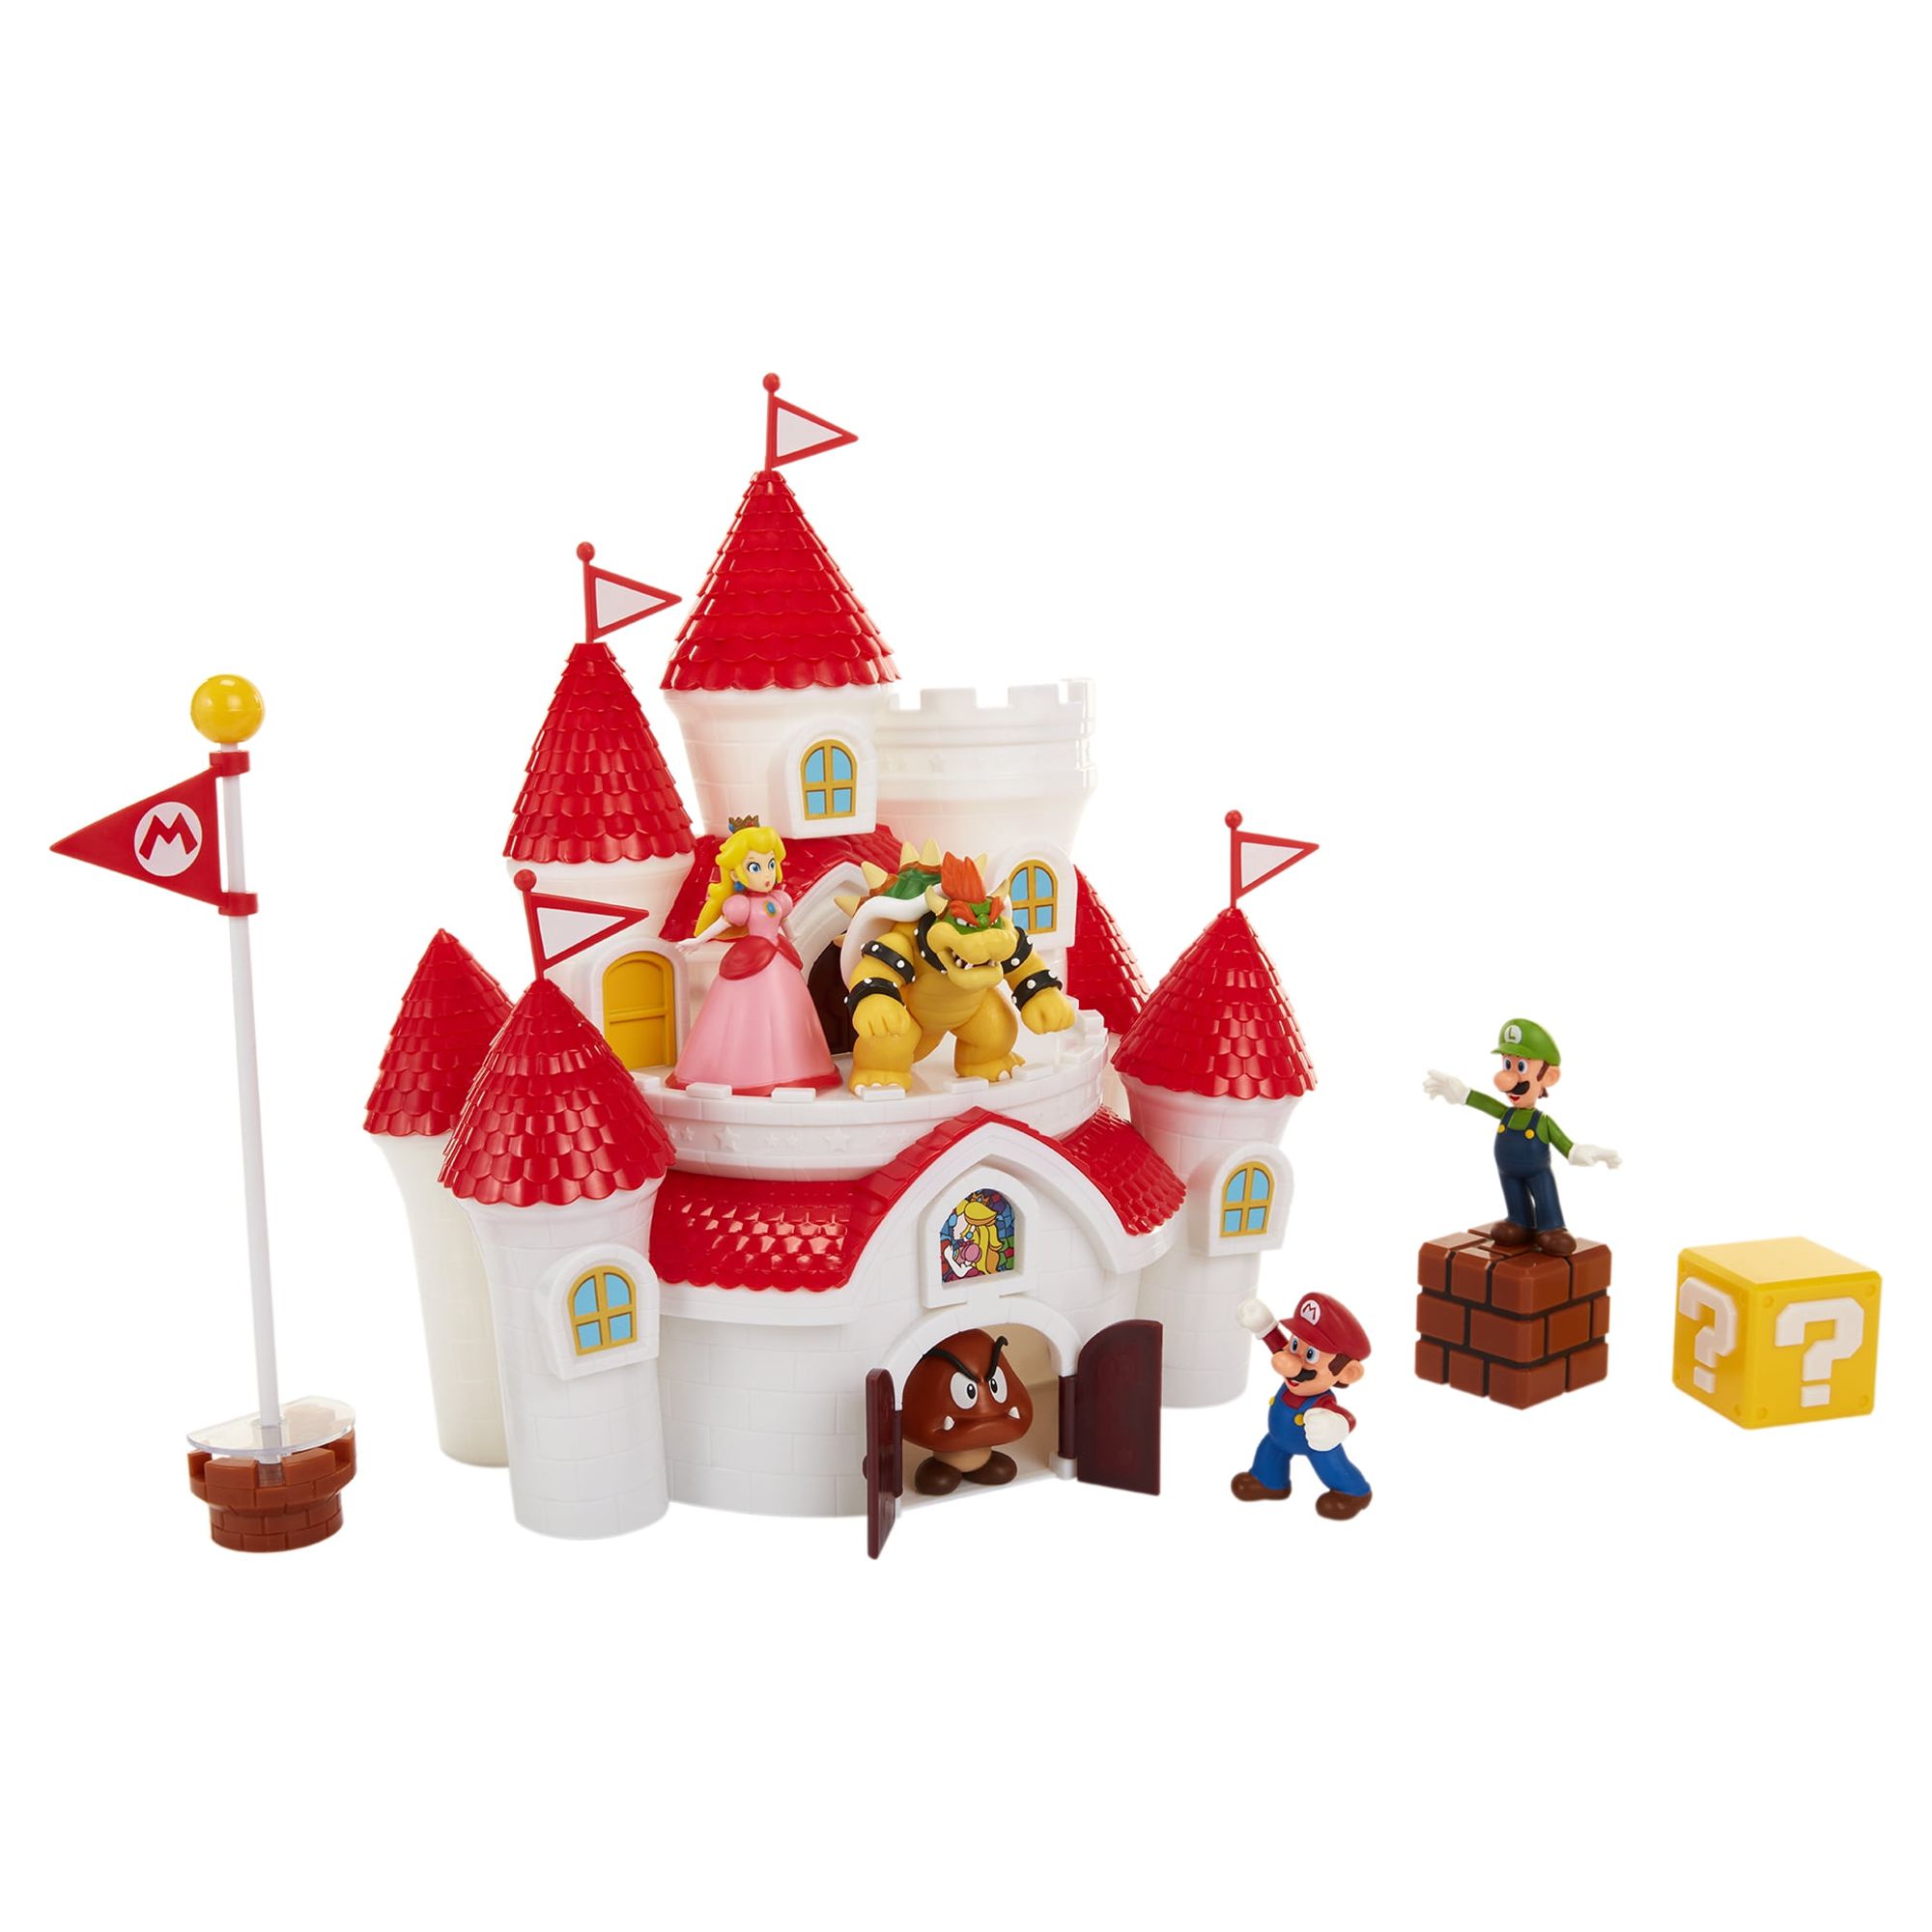 Nintendo Super Mario Deluxe Mushroom Kingdom Castle Playset With 5 2 5 Articulated Action